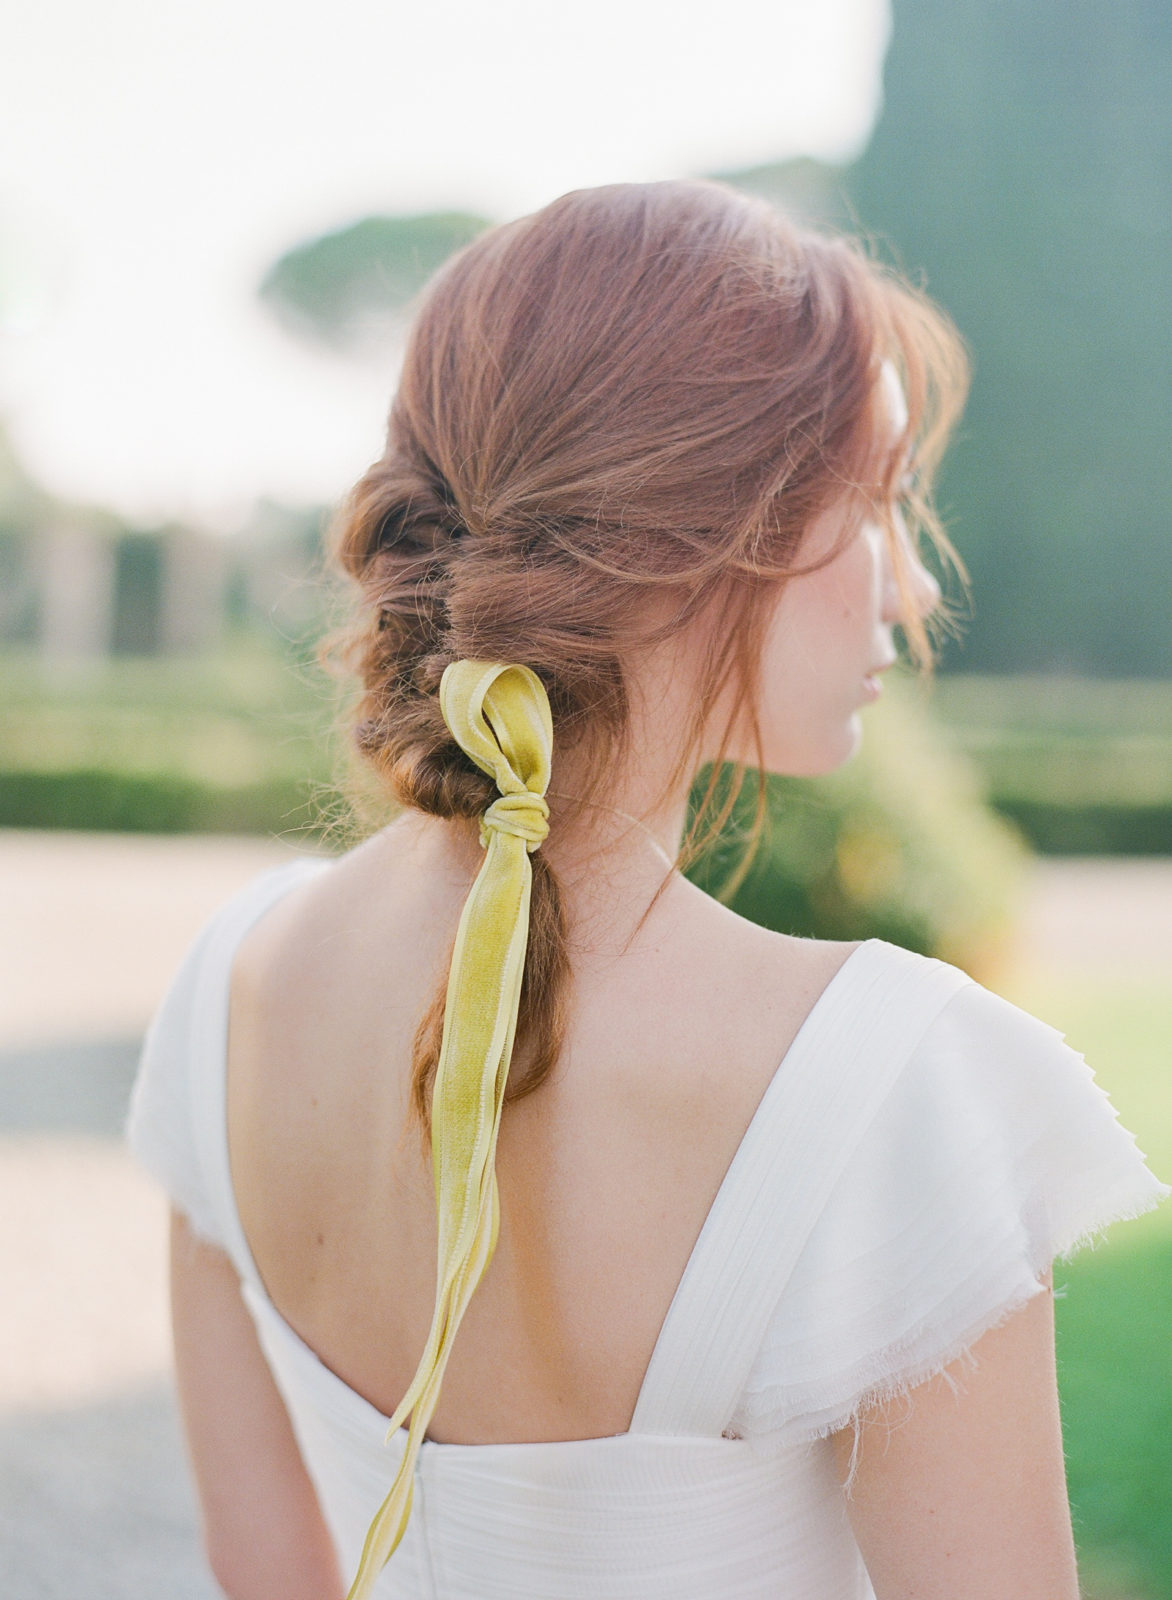 Romantic Bridal Hairstyles Photographed by Molly Carr Photography | Fine Art Bridal Hair and Makeup | Paris Wedding Photographer | Paris Film Photographer | France Destination Wedding | Bridal Braid | Villa di Geggiano Wedding in Siena, Tuscany, Italy with Fete in France